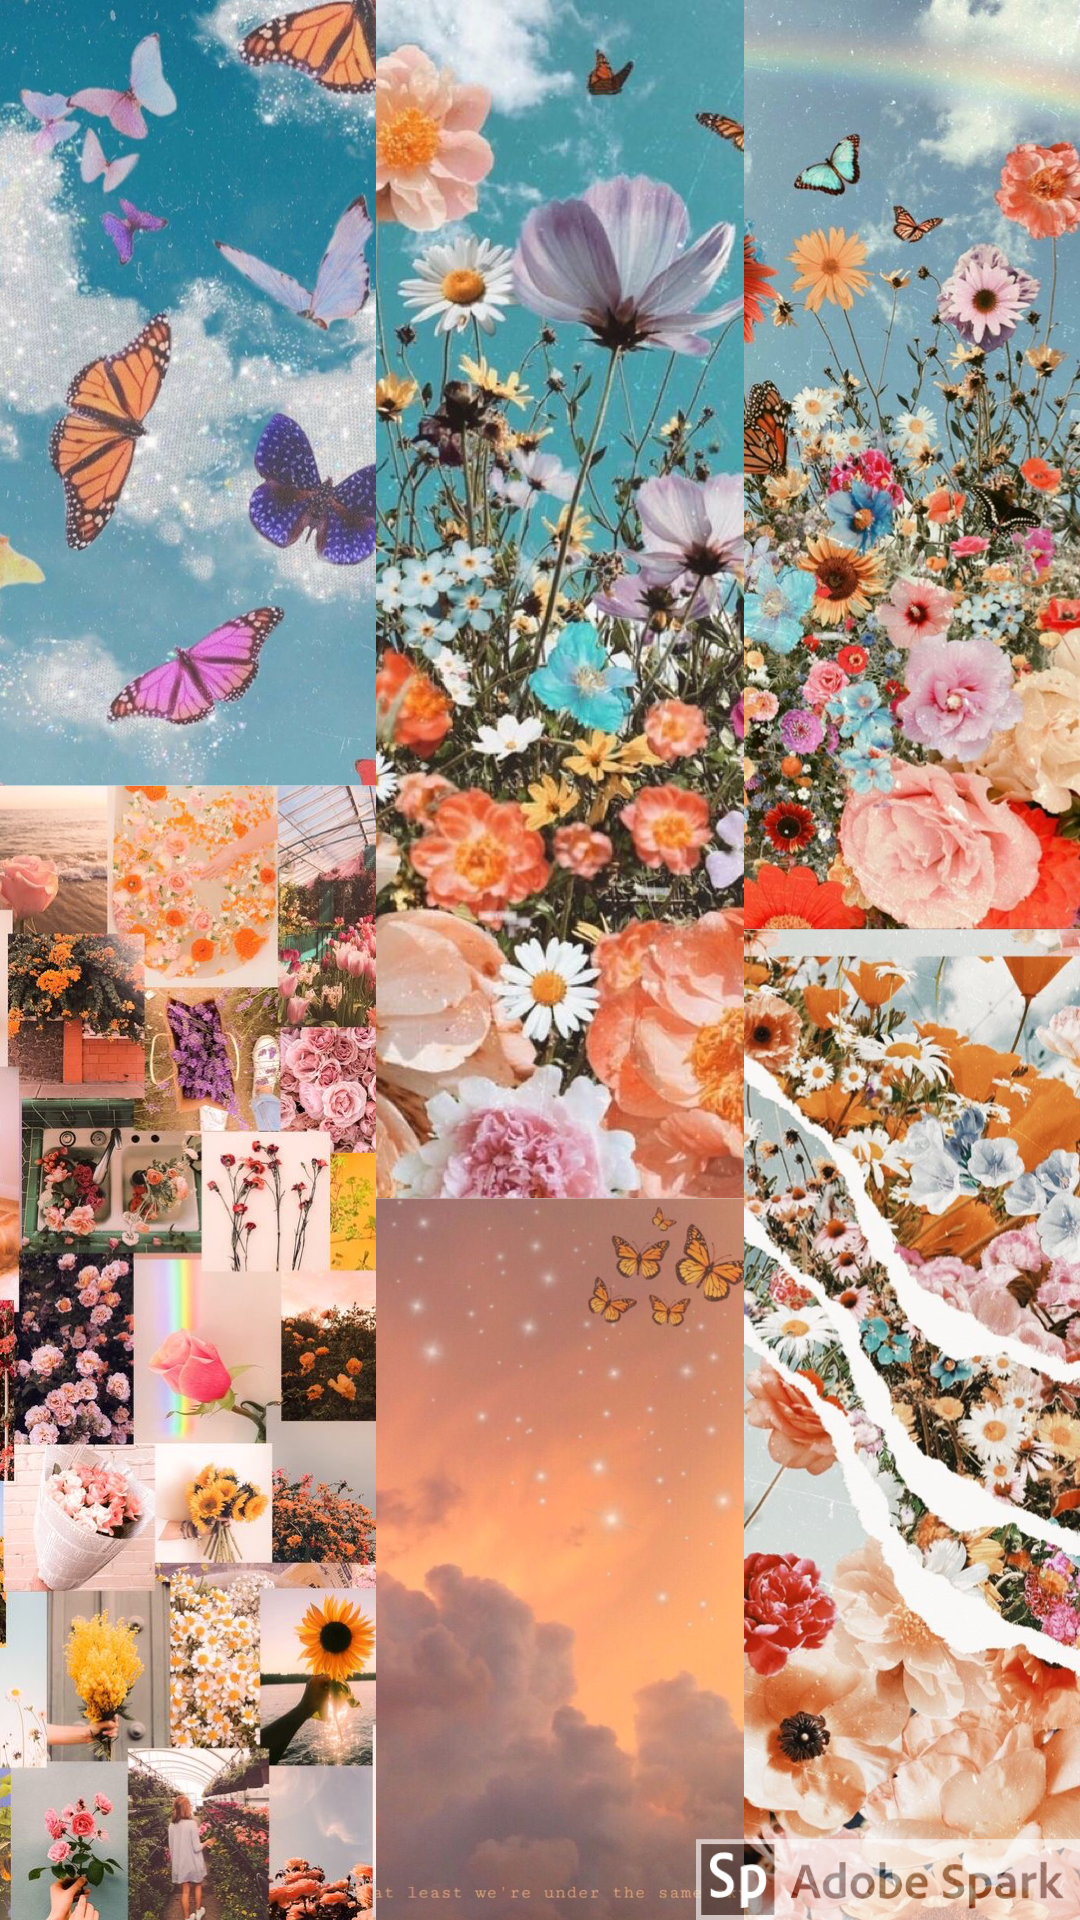 Aesthetic butterfly flower wallpaper. Abstract art wallpaper, iPhone wallpaper tumblr aesthetic, Aesthetic iphone wallpaper